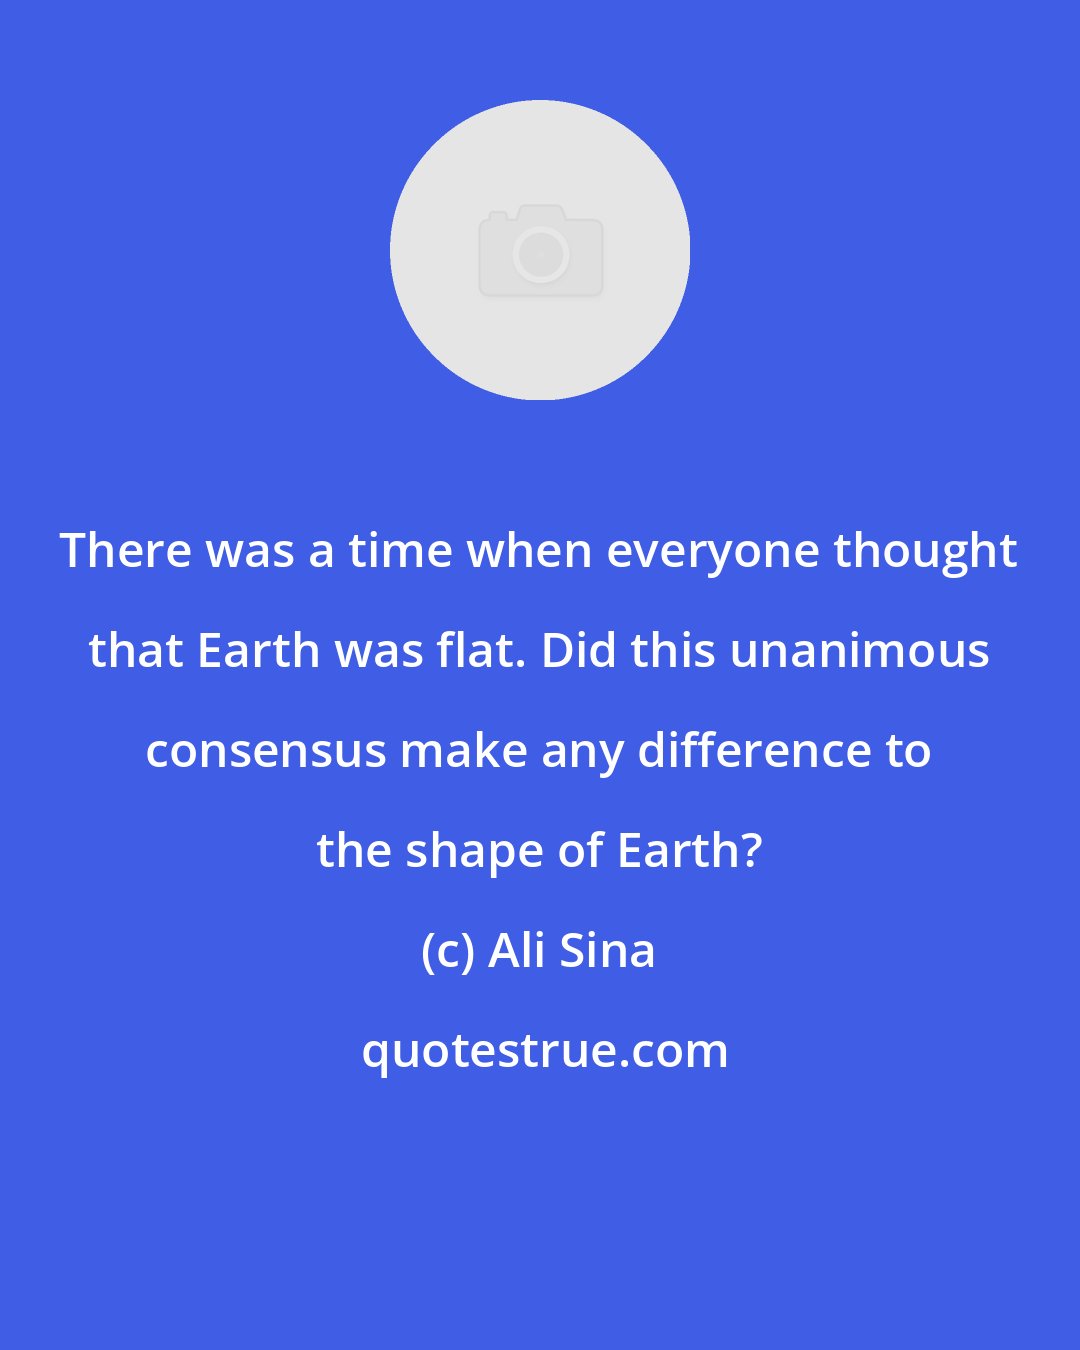 Ali Sina: There was a time when everyone thought that Earth was flat. Did this unanimous consensus make any difference to the shape of Earth?